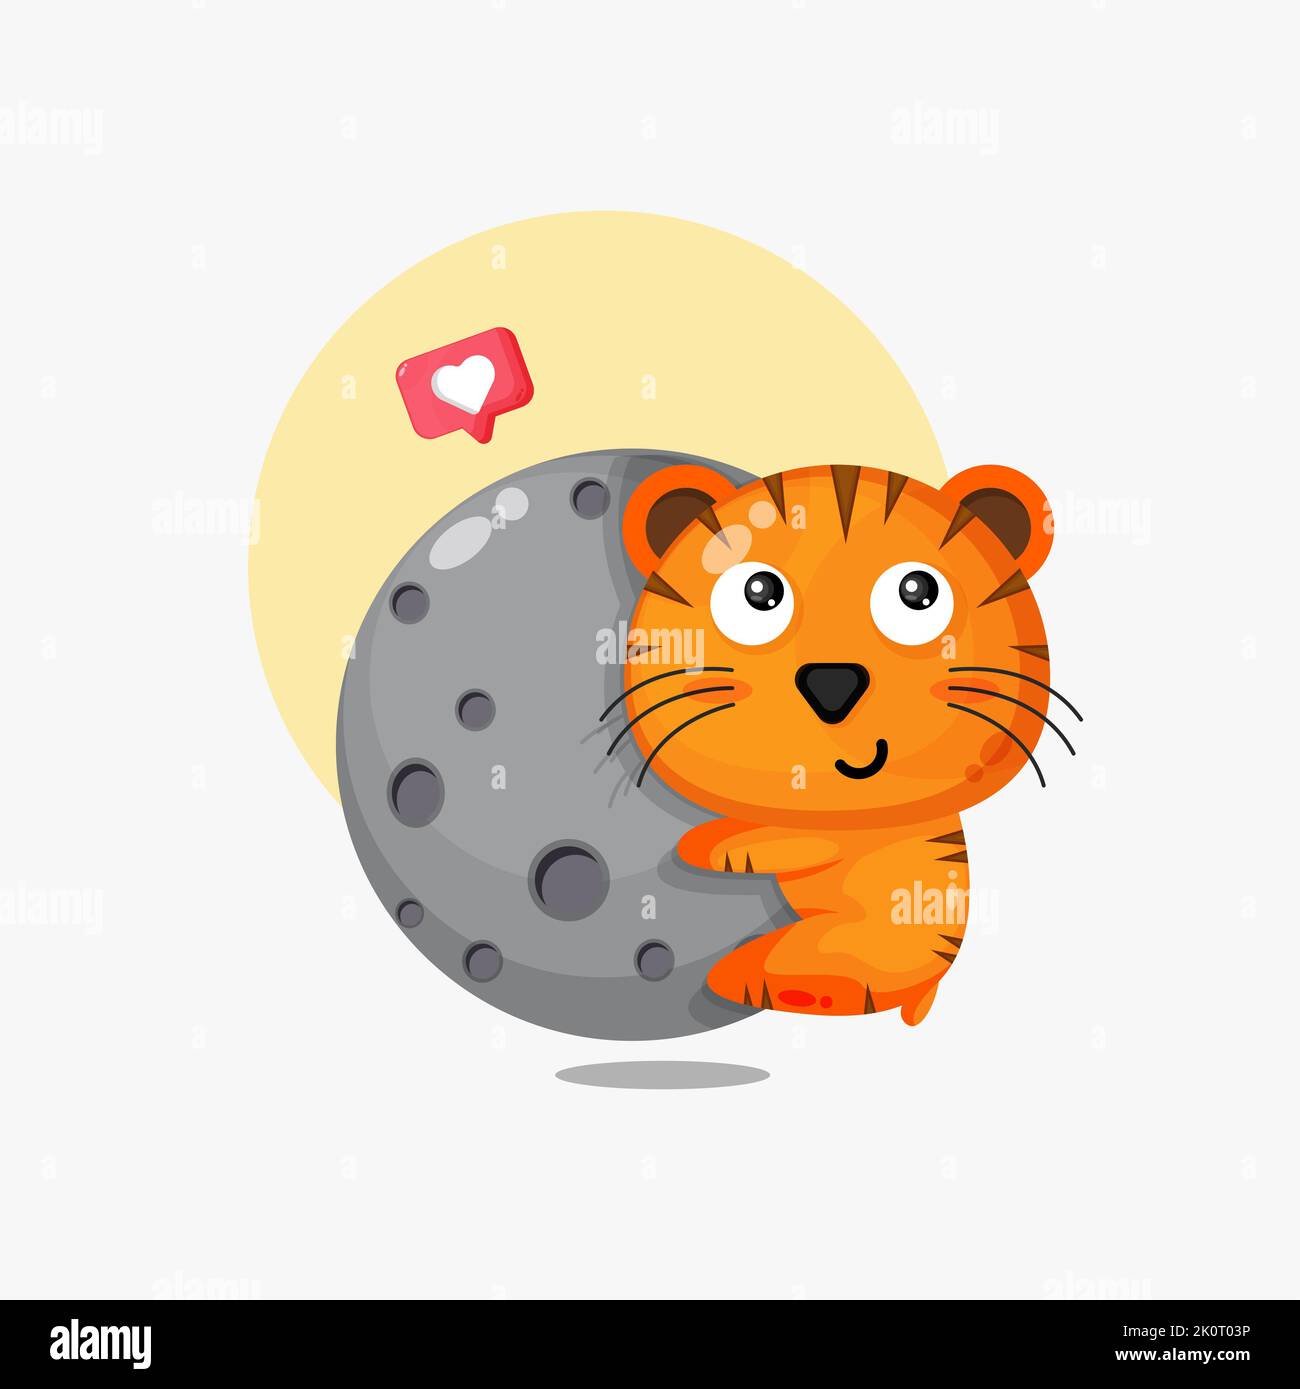 Illustration of a cute tiger hugging the moon Stock Photo